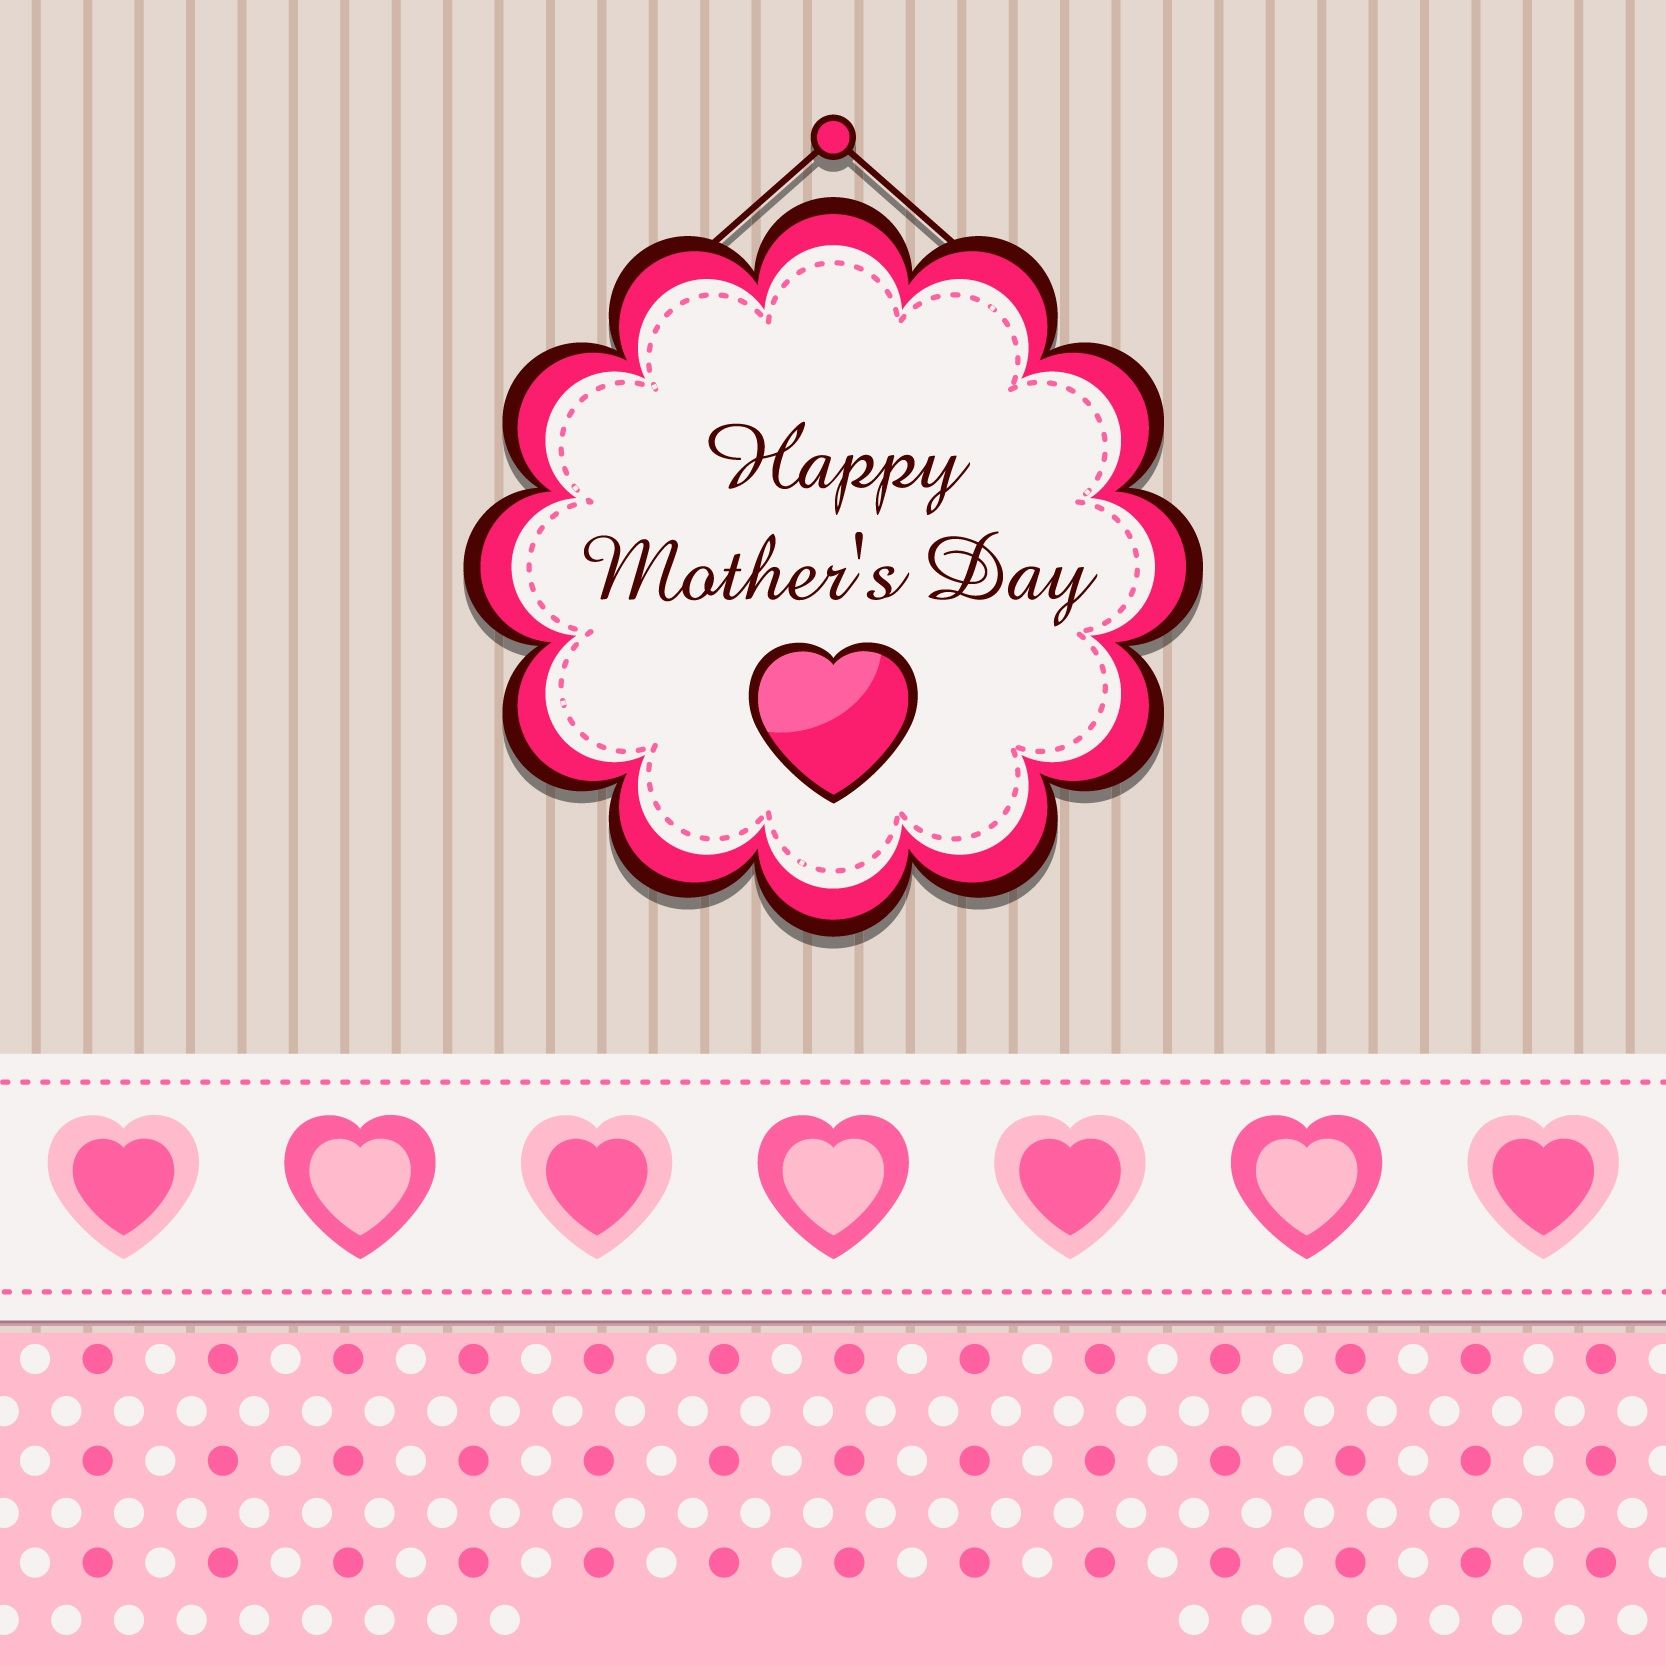 Happy Mothers Day Wallpaper In Full HD 1080p